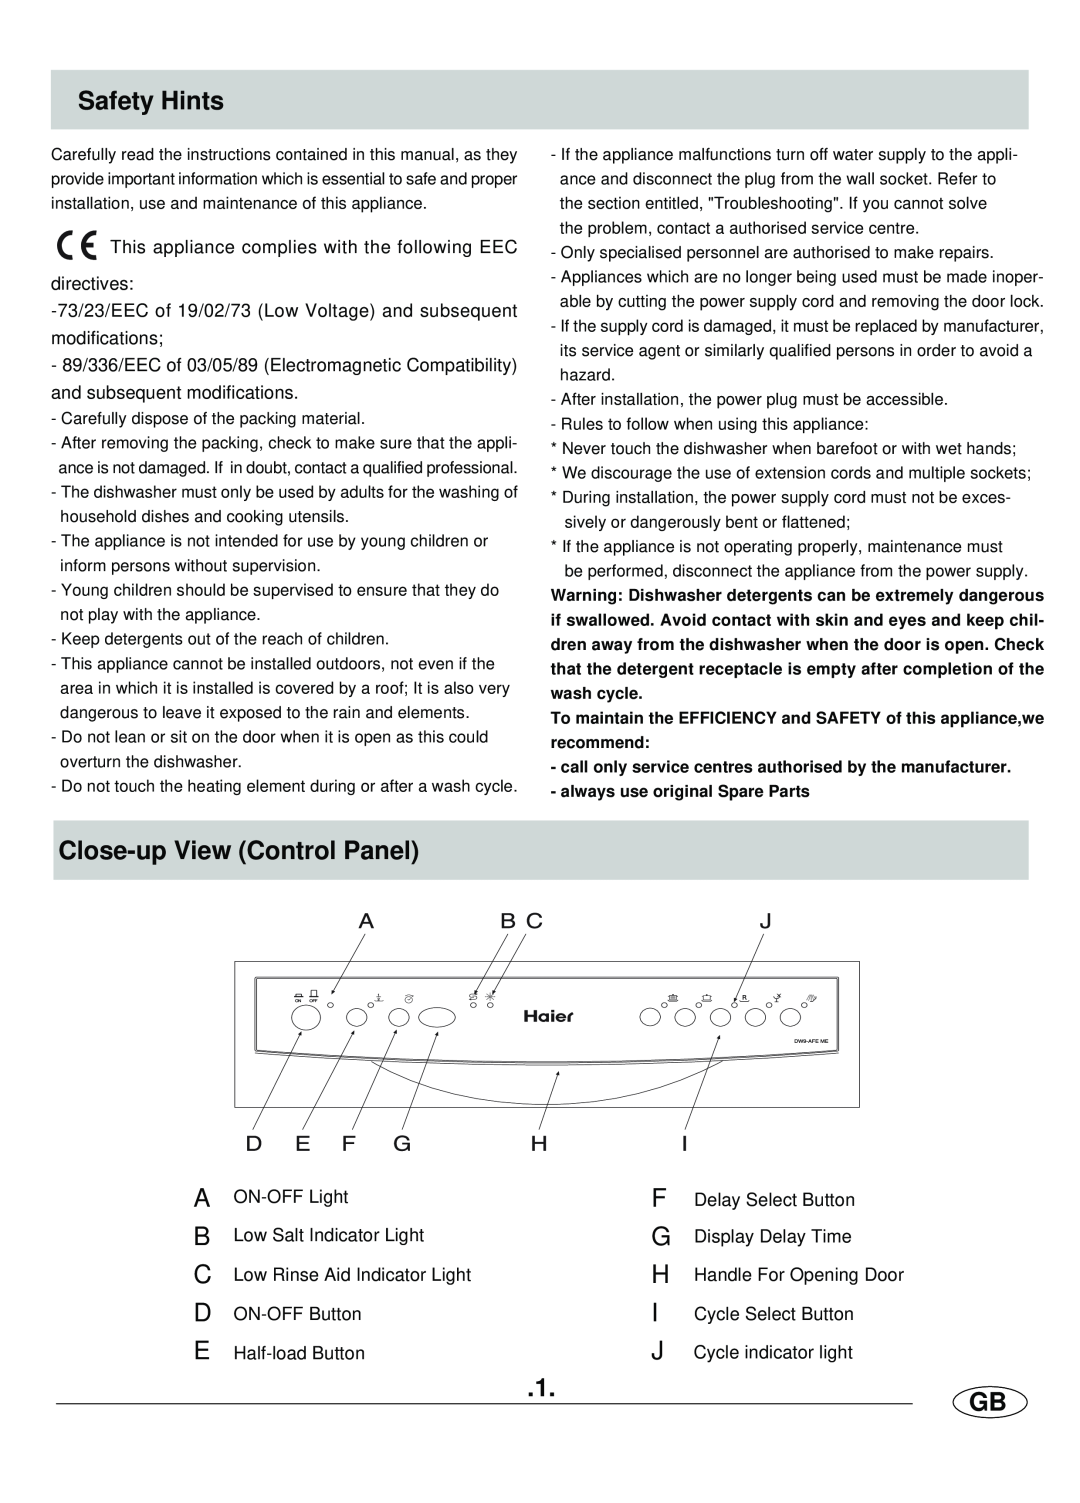 Haier DW9-AFE ME manual Safety Hints, Close-upView Control Panel 